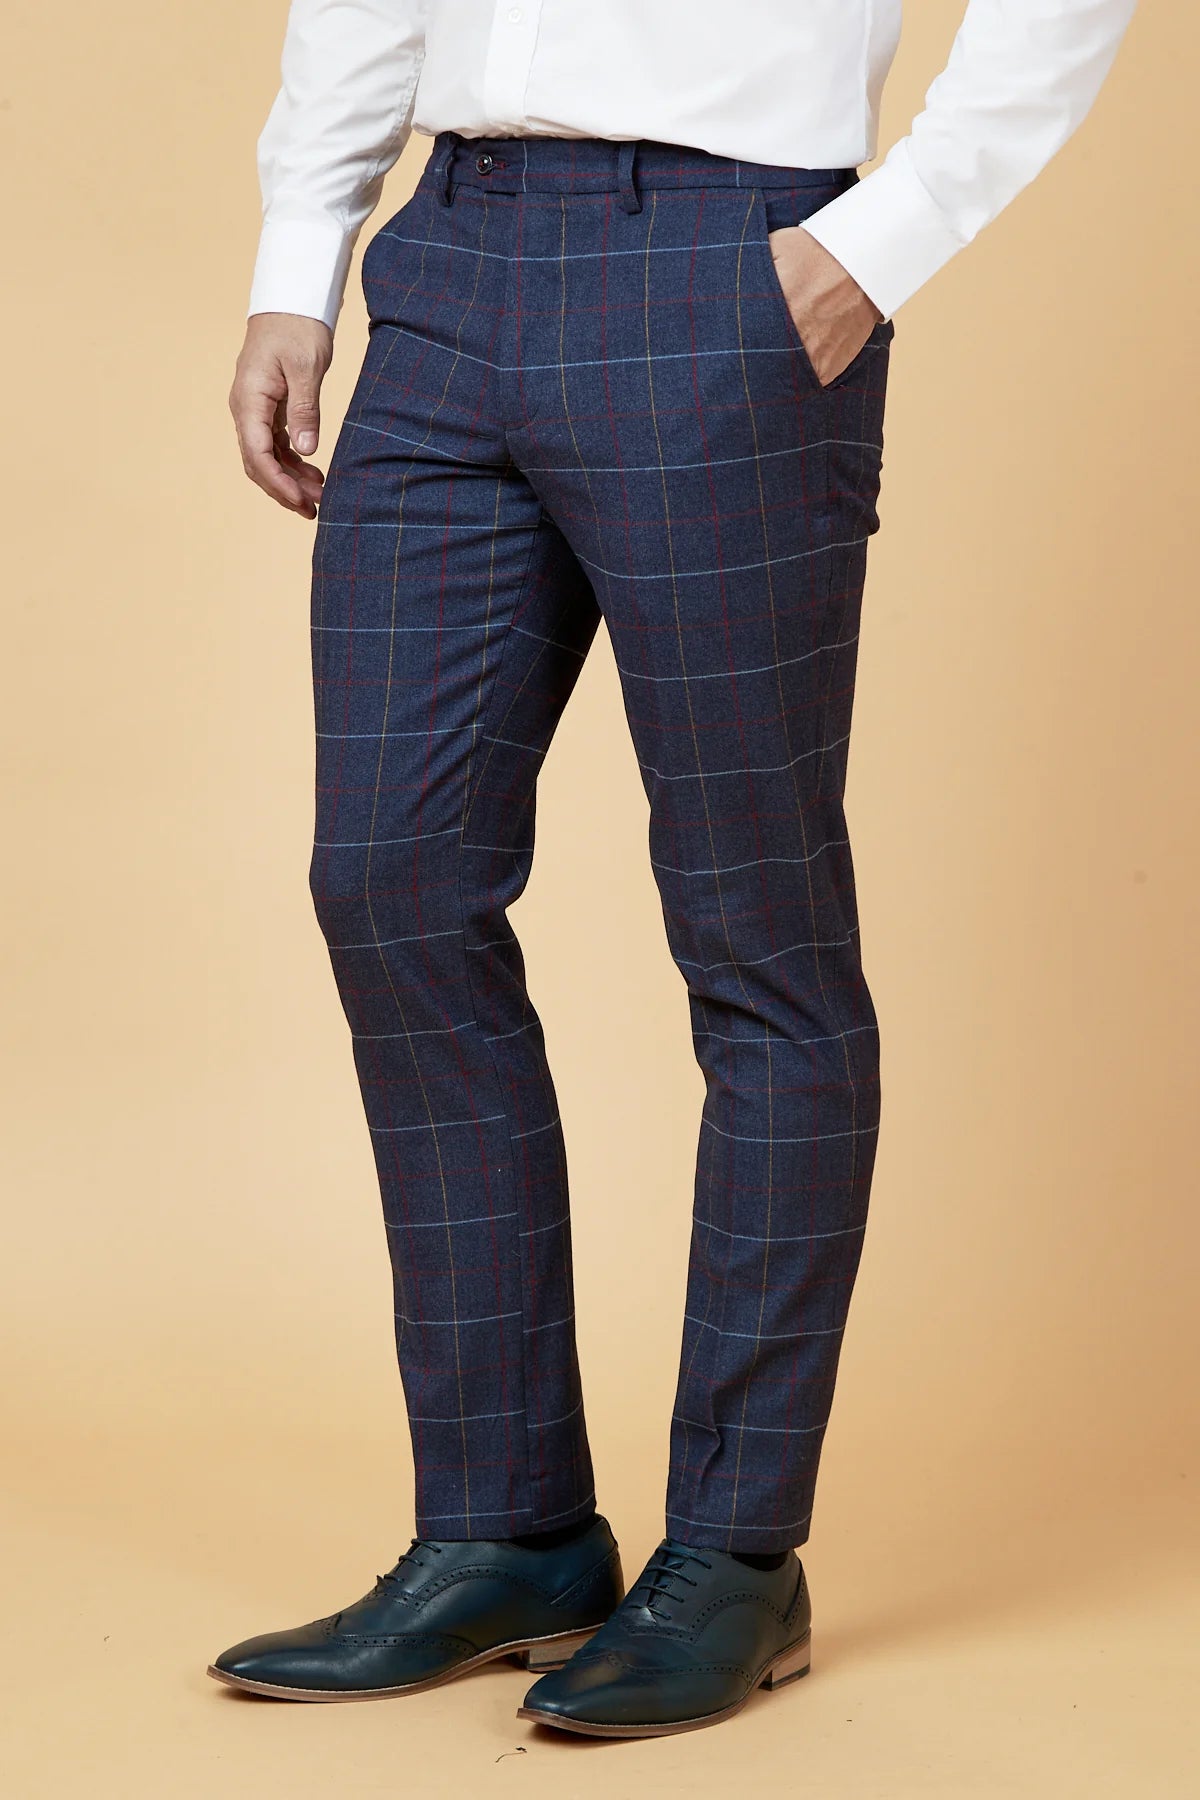 Blue Check Suit - Marc Darcy Drake Navy